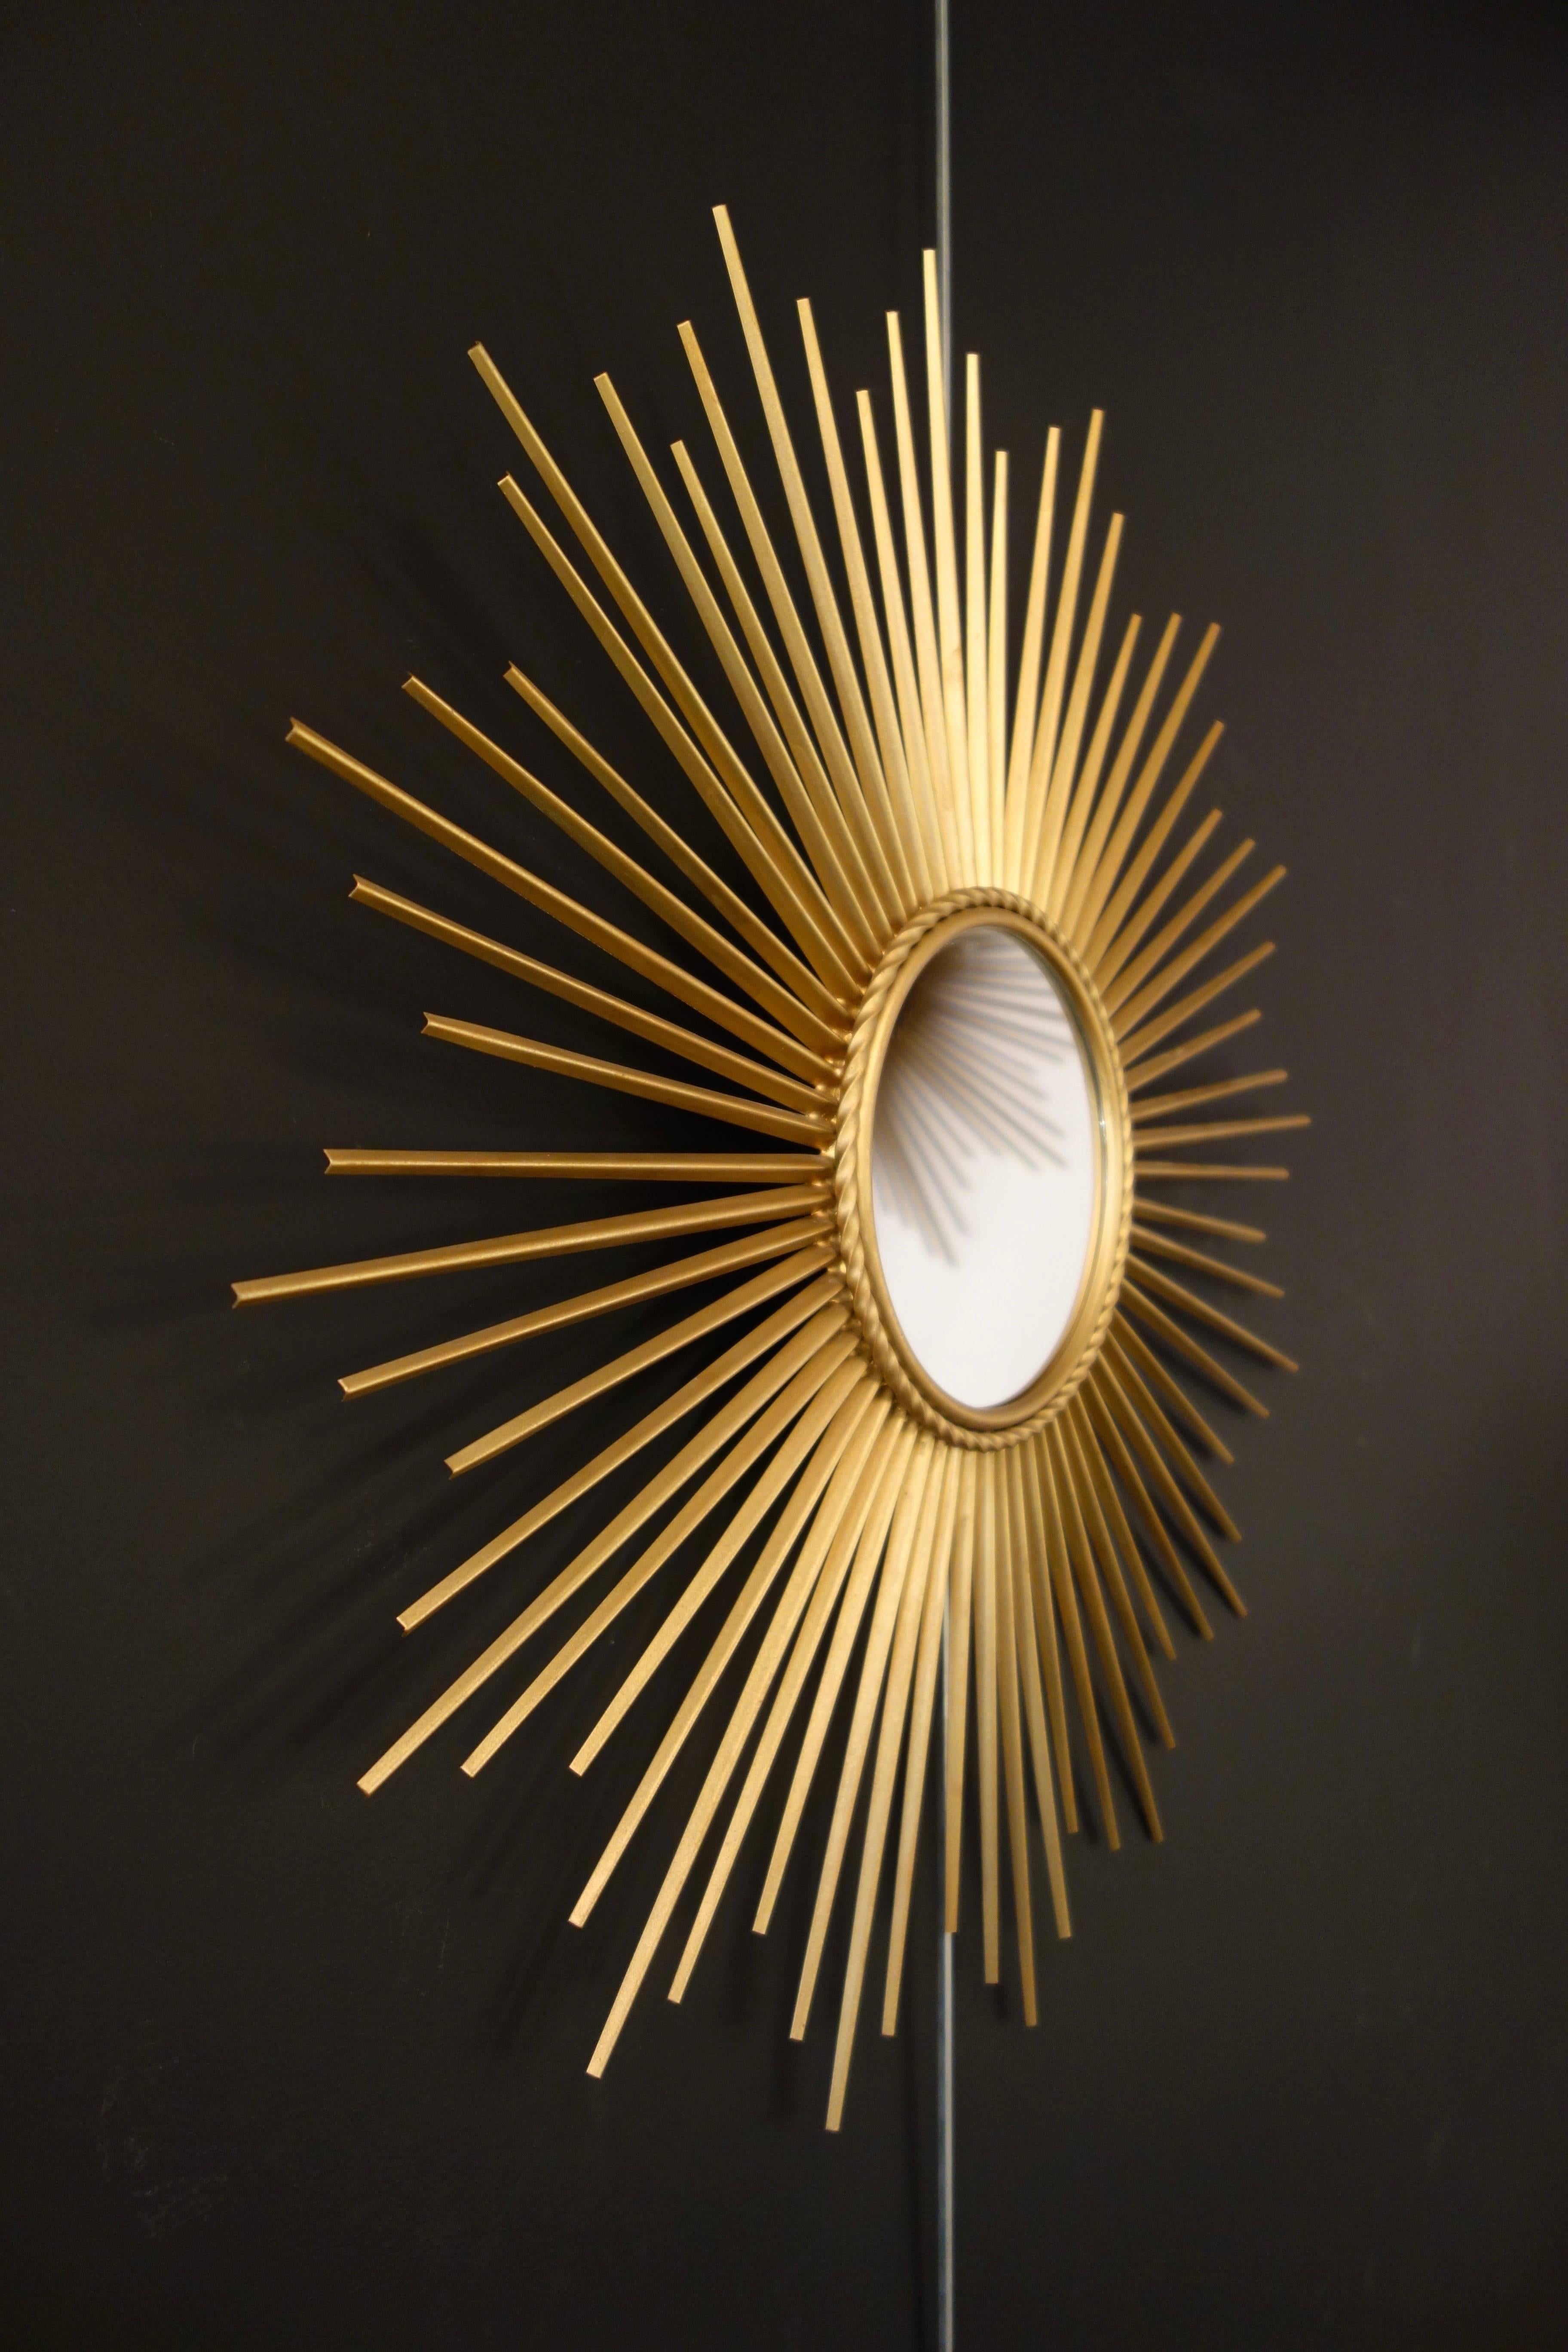 Sunburst mirror by Chaty Vallauris. French manufacture of the 1960s. No Signed, the cardboard was replaced at one time. Golden metal rods and traditional mirror. In perfect condition: no twisted or damaged stems, beautiful patina. Wall hook. Total